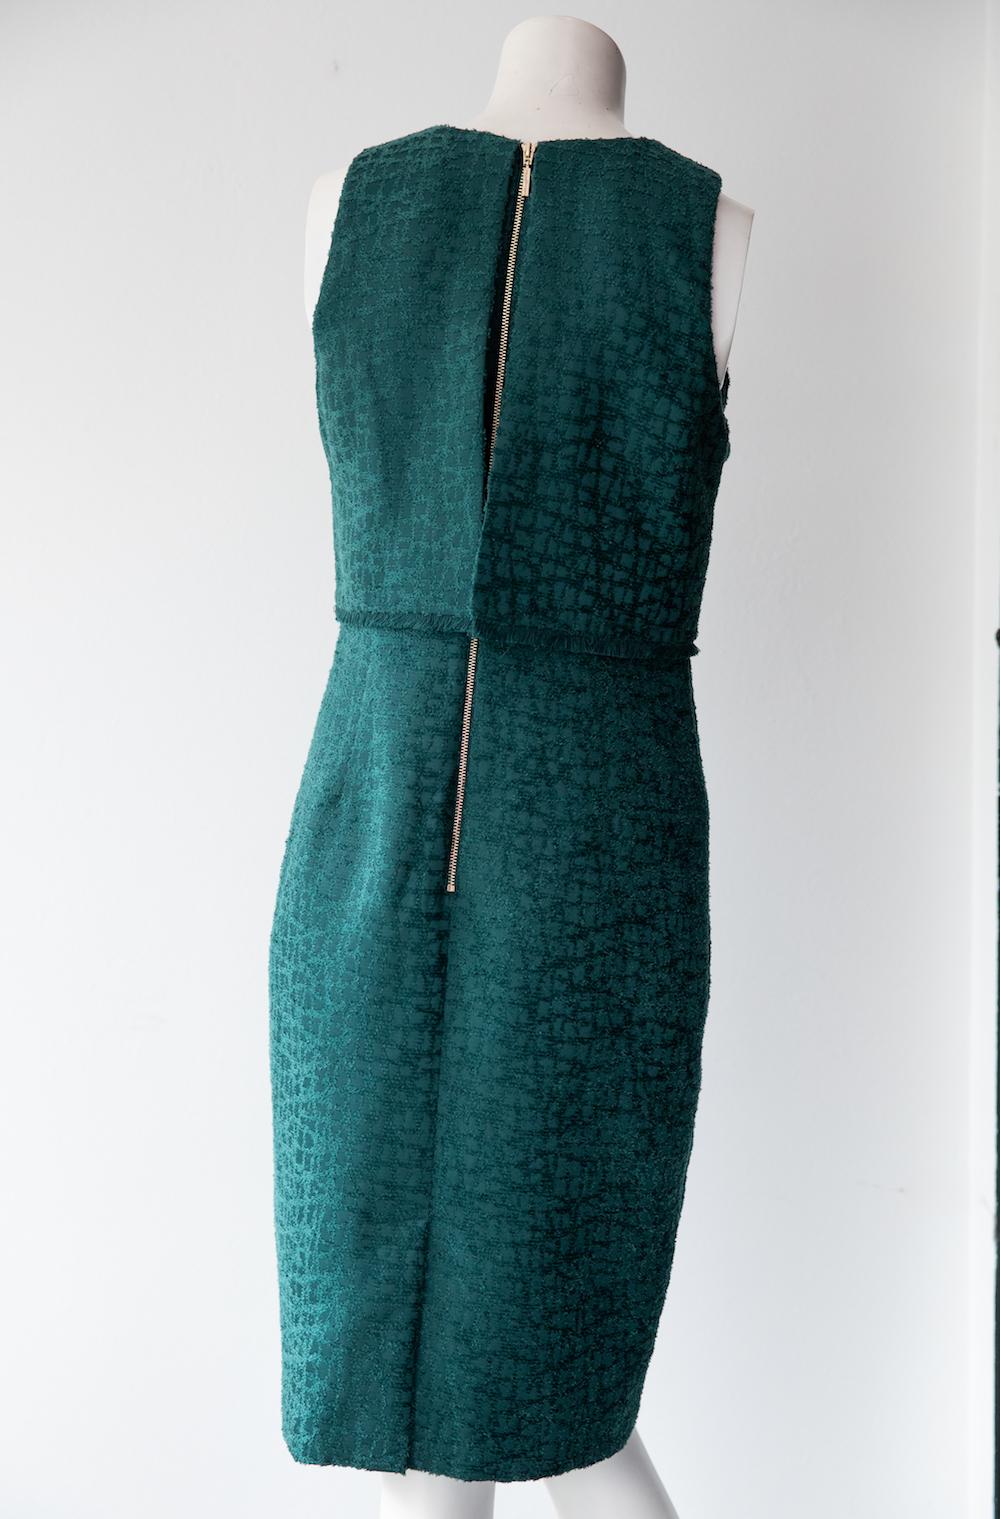 Emerald green shift dress by Karl Lagerfeld. The fabric has a slight shine and raised texture which gives a tweed effect. Waist-panels are finished with a raw hem, and are open at back. Thick gold back zipper completes the dress. 

Size US 2